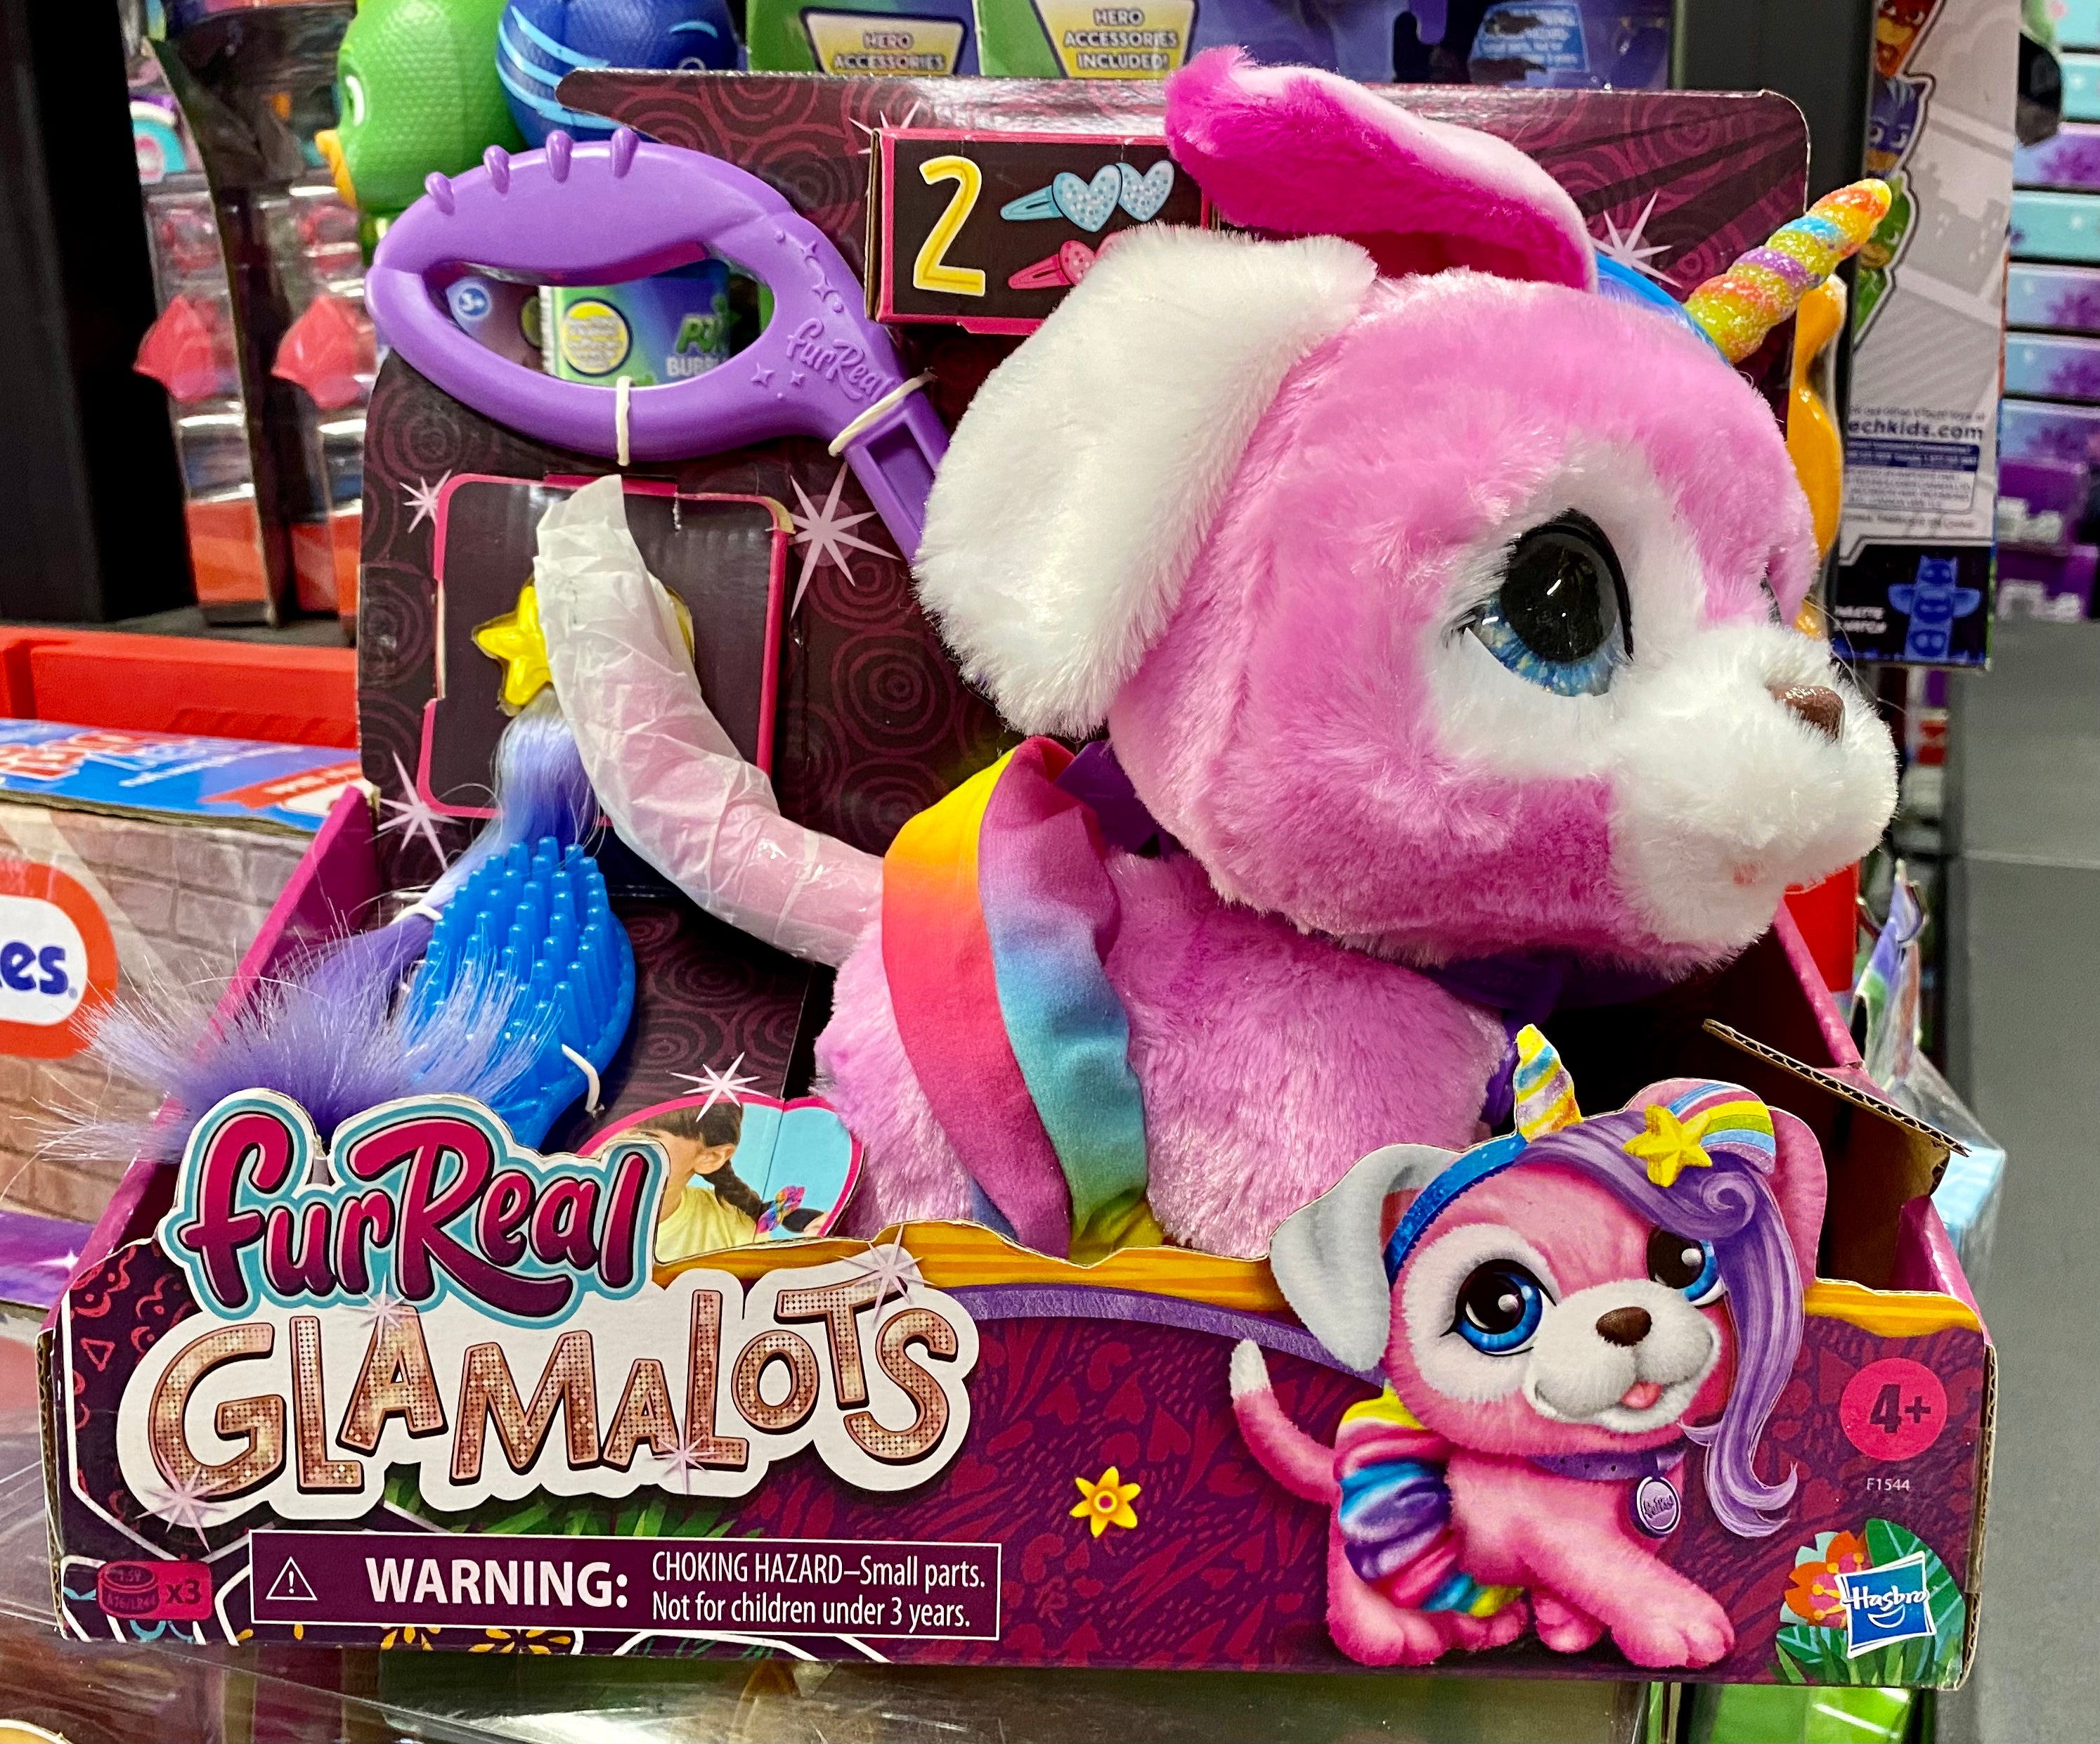 FurReal Friends Glamalots Puppy Toy